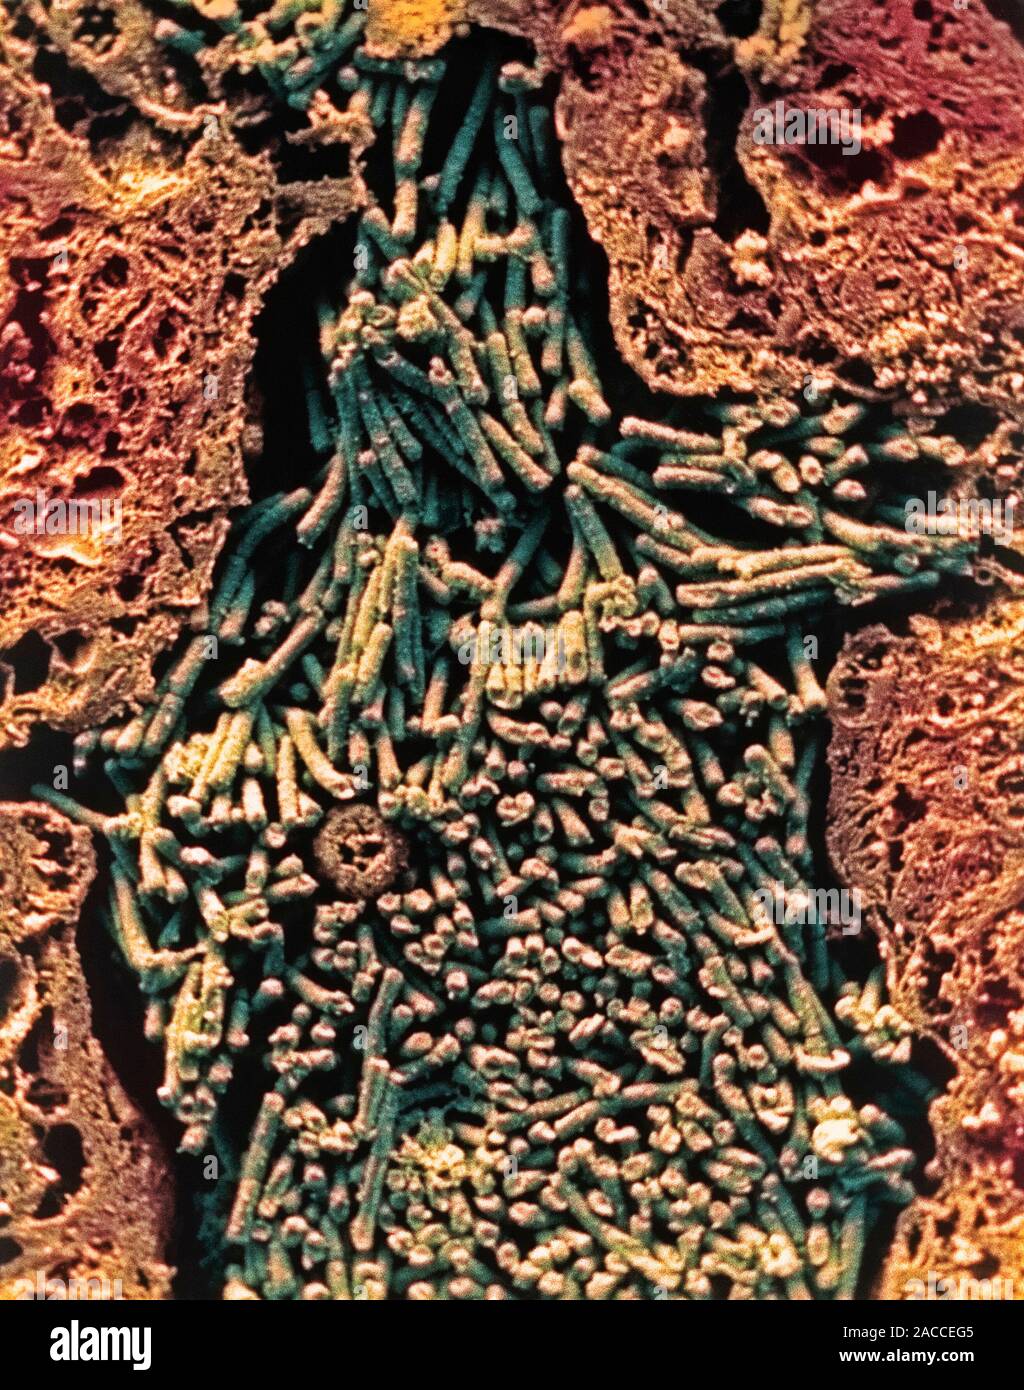 Anthrax Bacteria Coloured Scanning Electron Micrograph Sem Of A Section Through Lung Tissue 8568